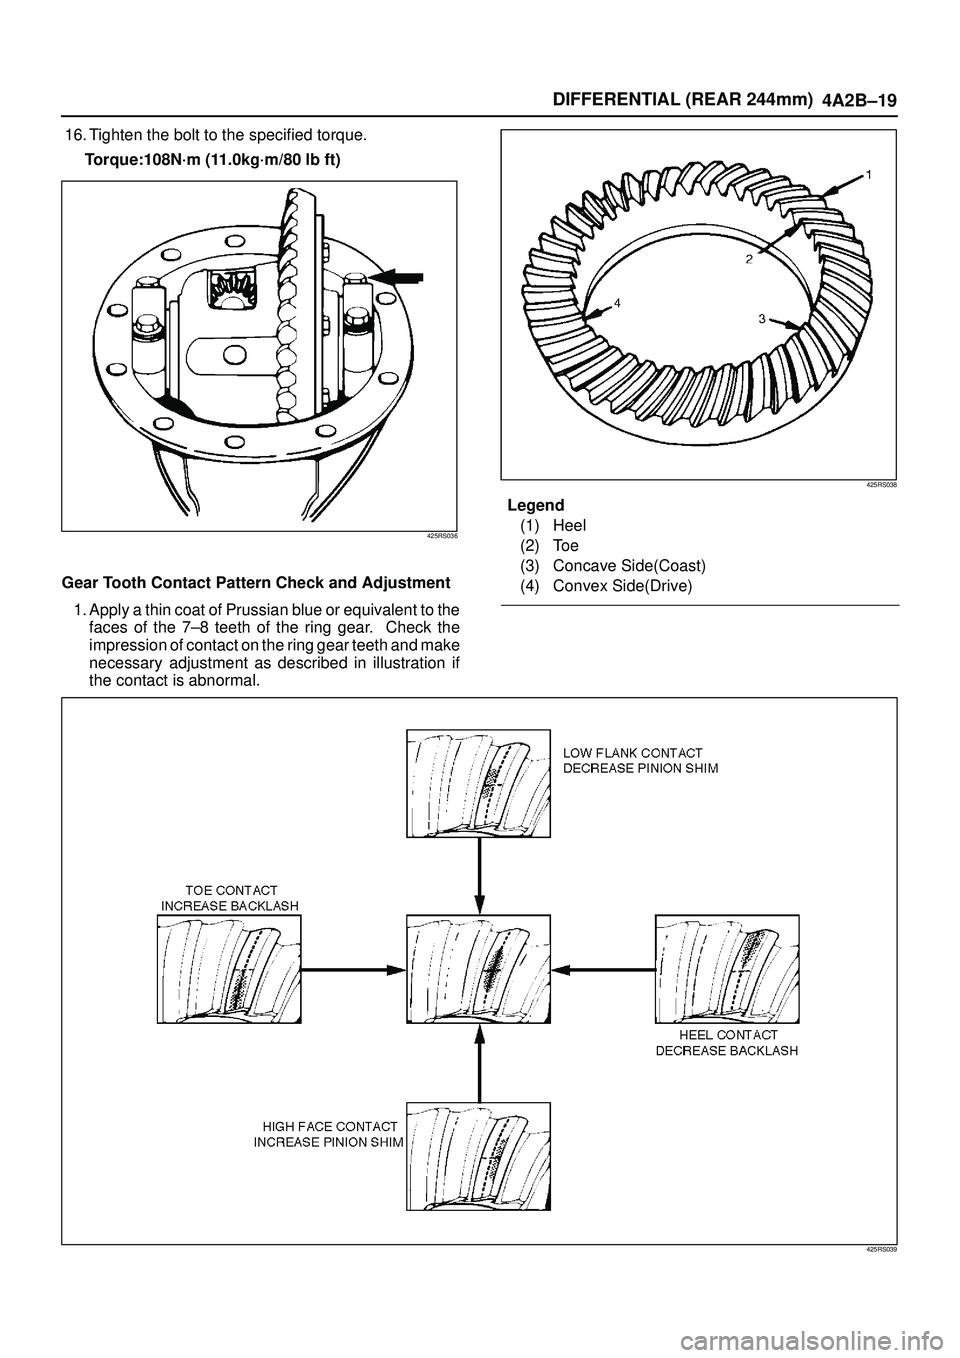 ISUZU TROOPER 1998  Service Repair Manual DIFFERENTIAL (REAR 244mm)
4A2B±19
16. Tighten the bolt to the specified torque.
Torque:108N´m (11.0kg´m/80 lb ft)
425RS036
Gear Tooth Contact Pattern Check and Adjustment
1. Apply a thin coat of Pr